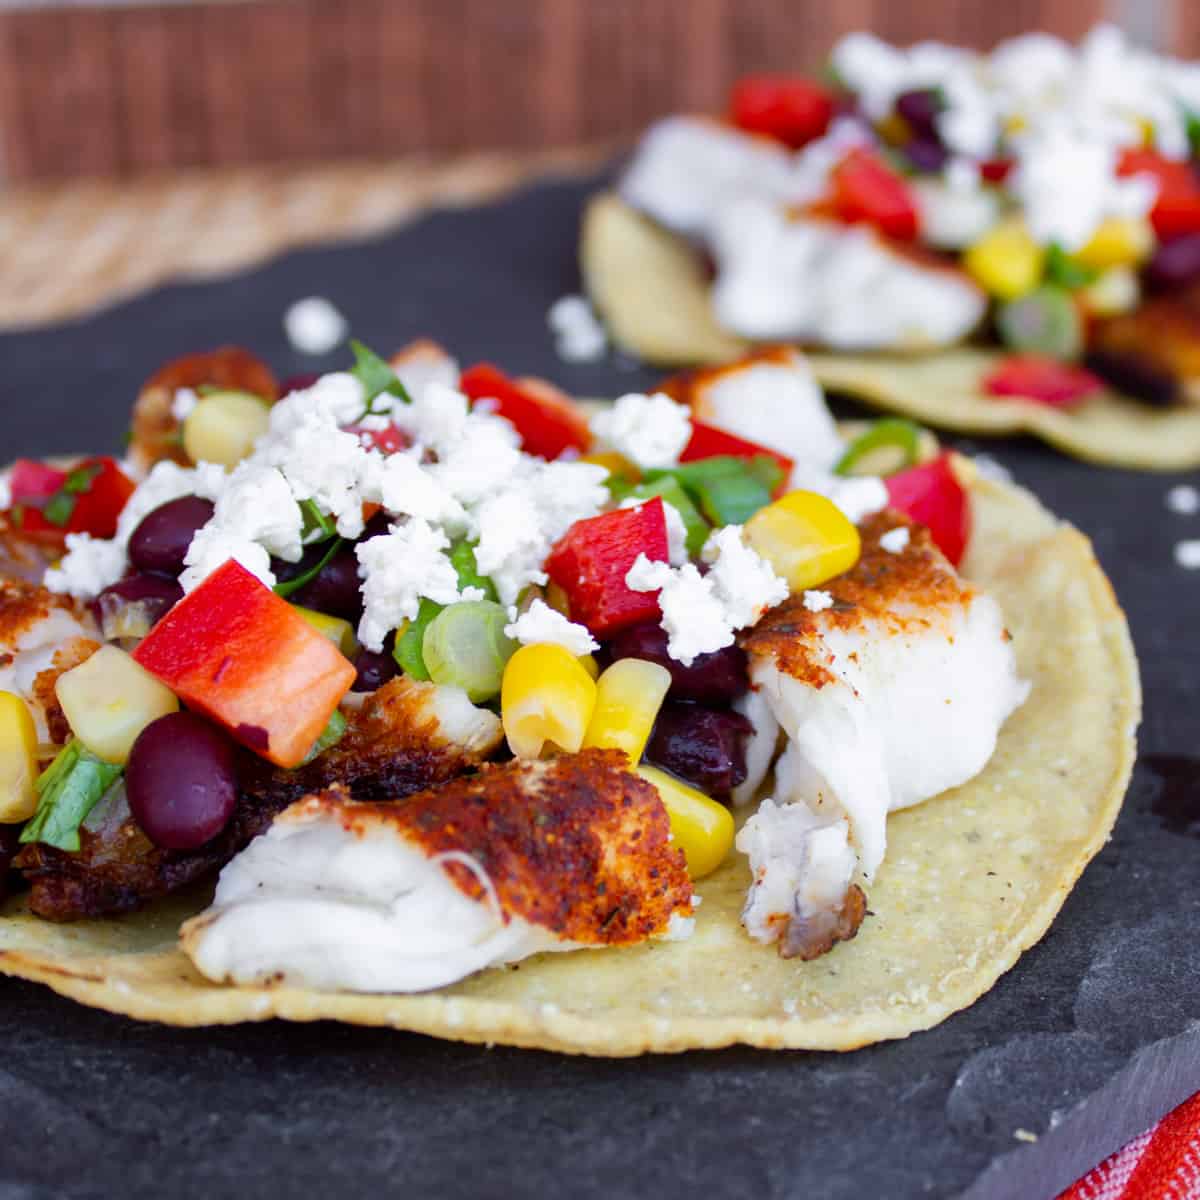 Grilled fish, crumbled feta and other ingredients on a hard corn tostada.